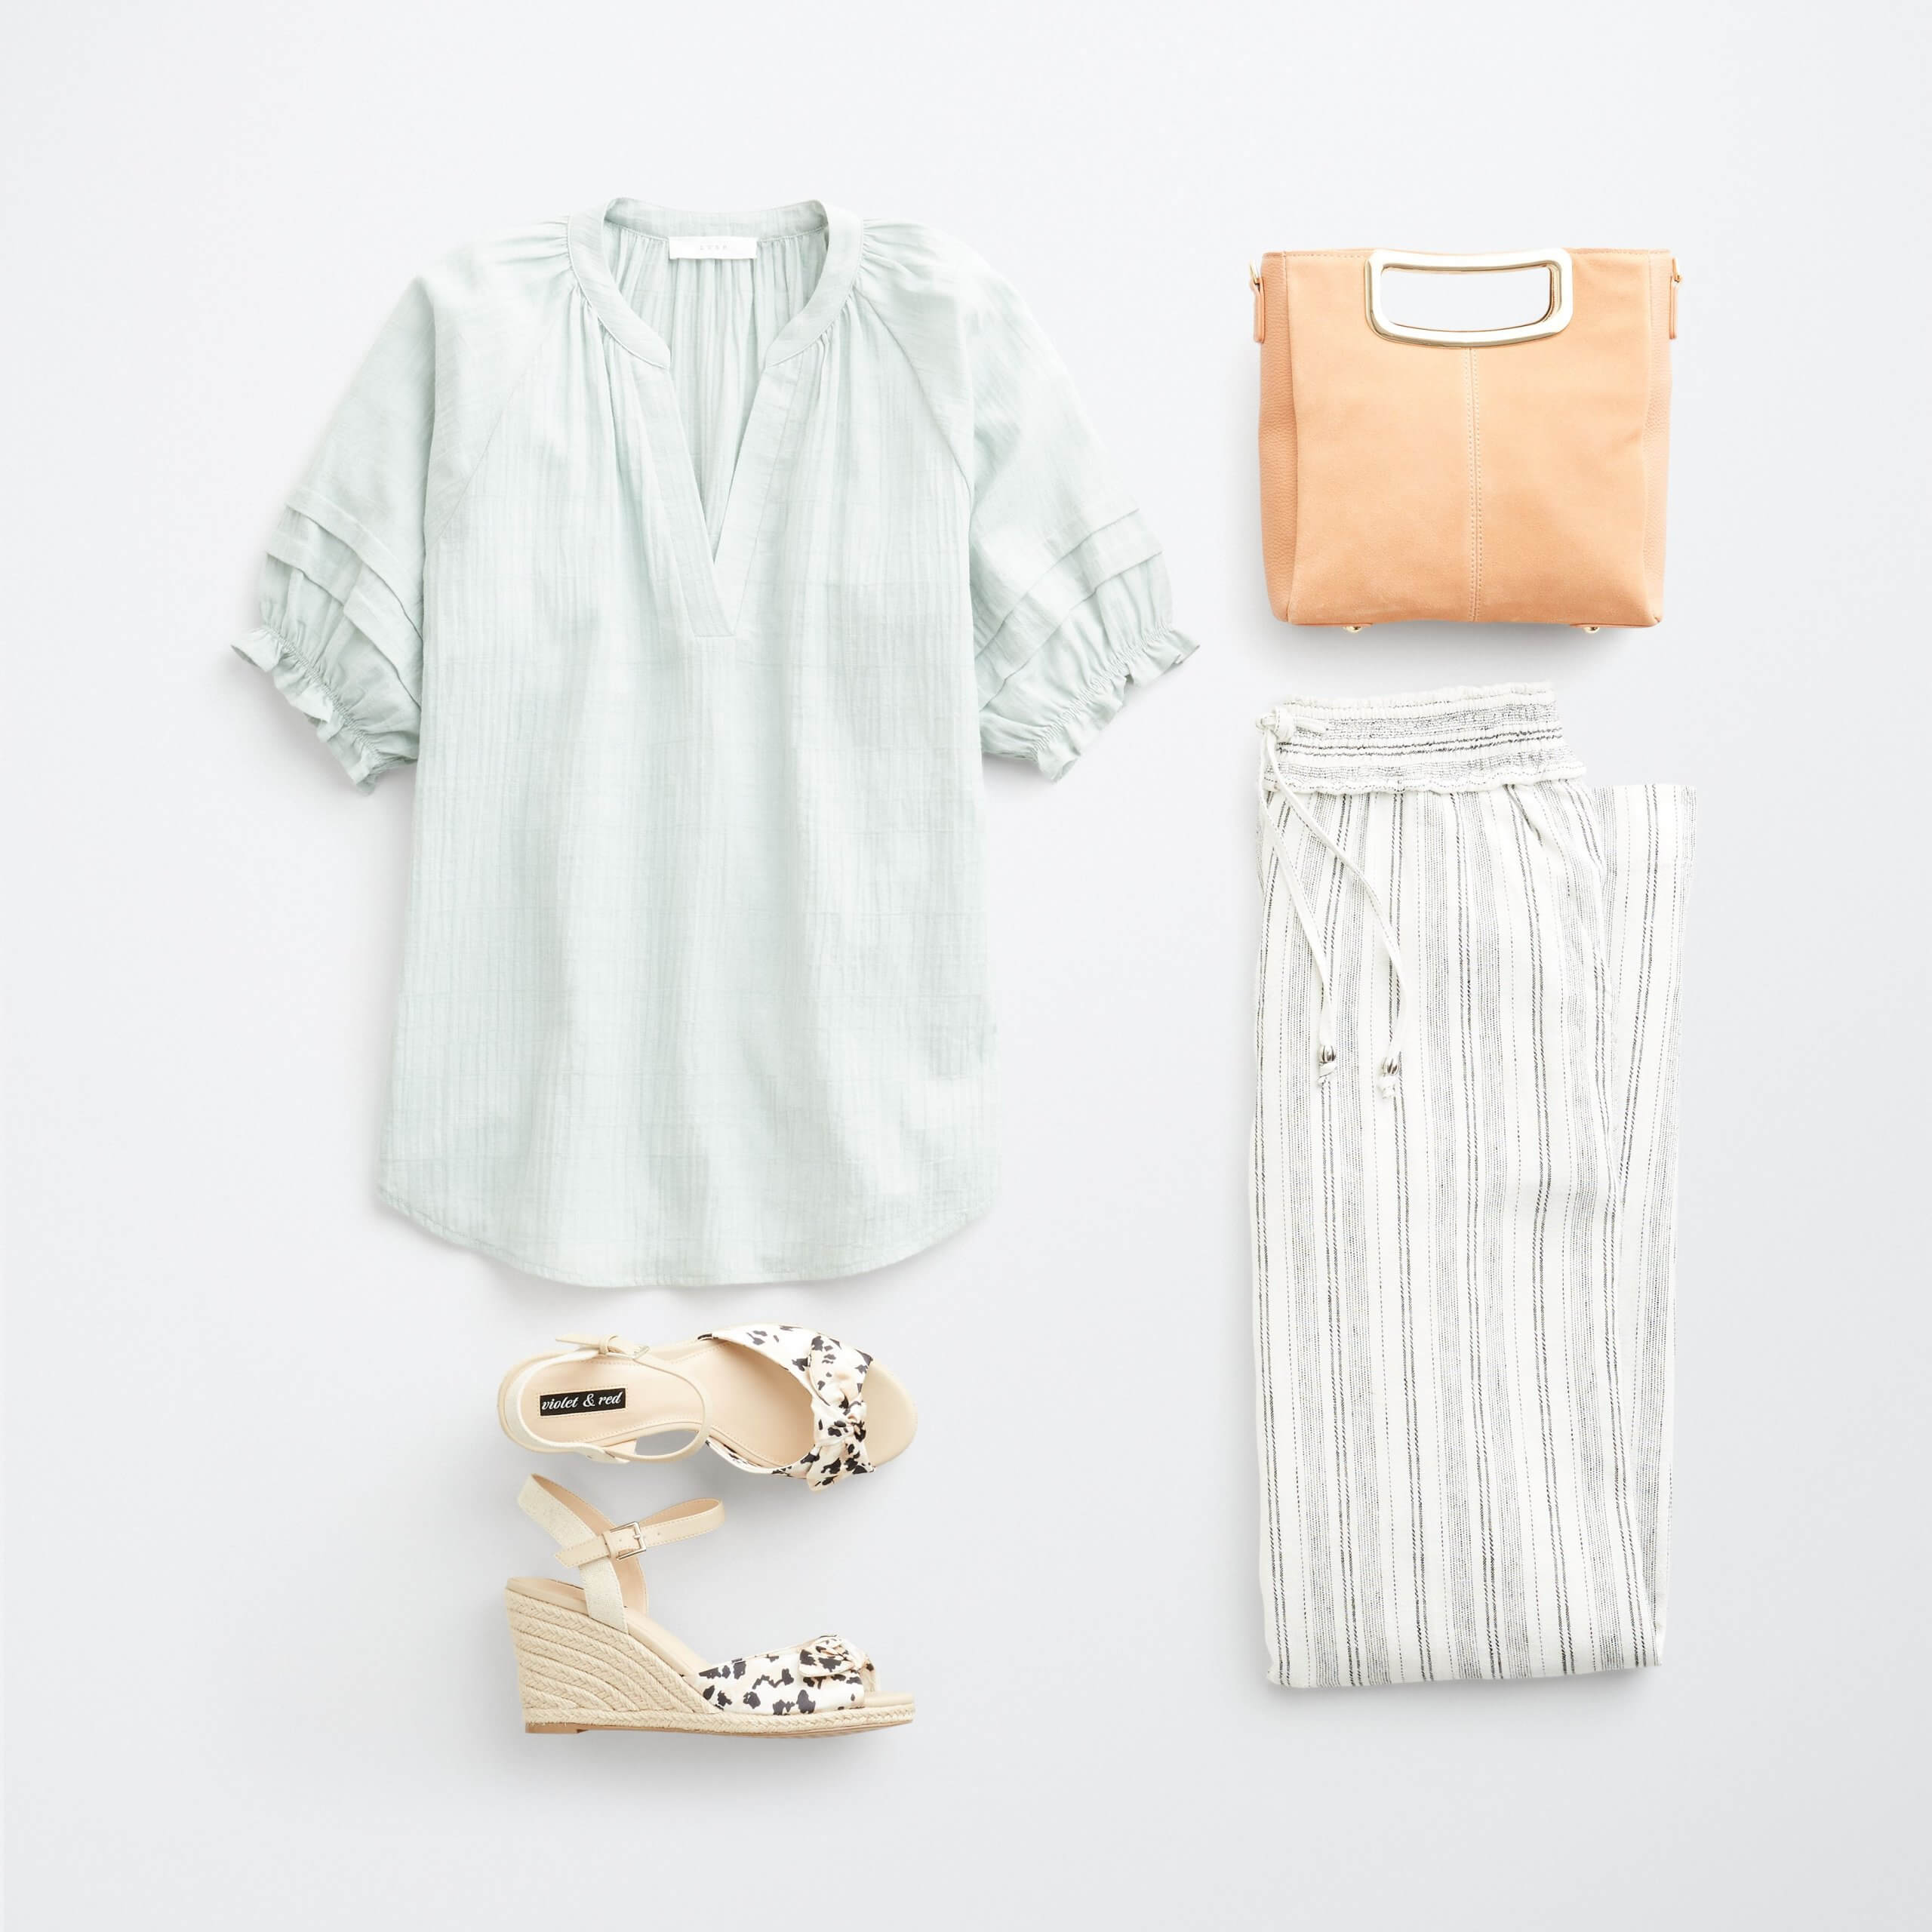 Stitch Fix Women's outfit laydown featuring mint green ruffle sleeve top, white striped wide-leg pants, tan animal print wedges, brown bag. 